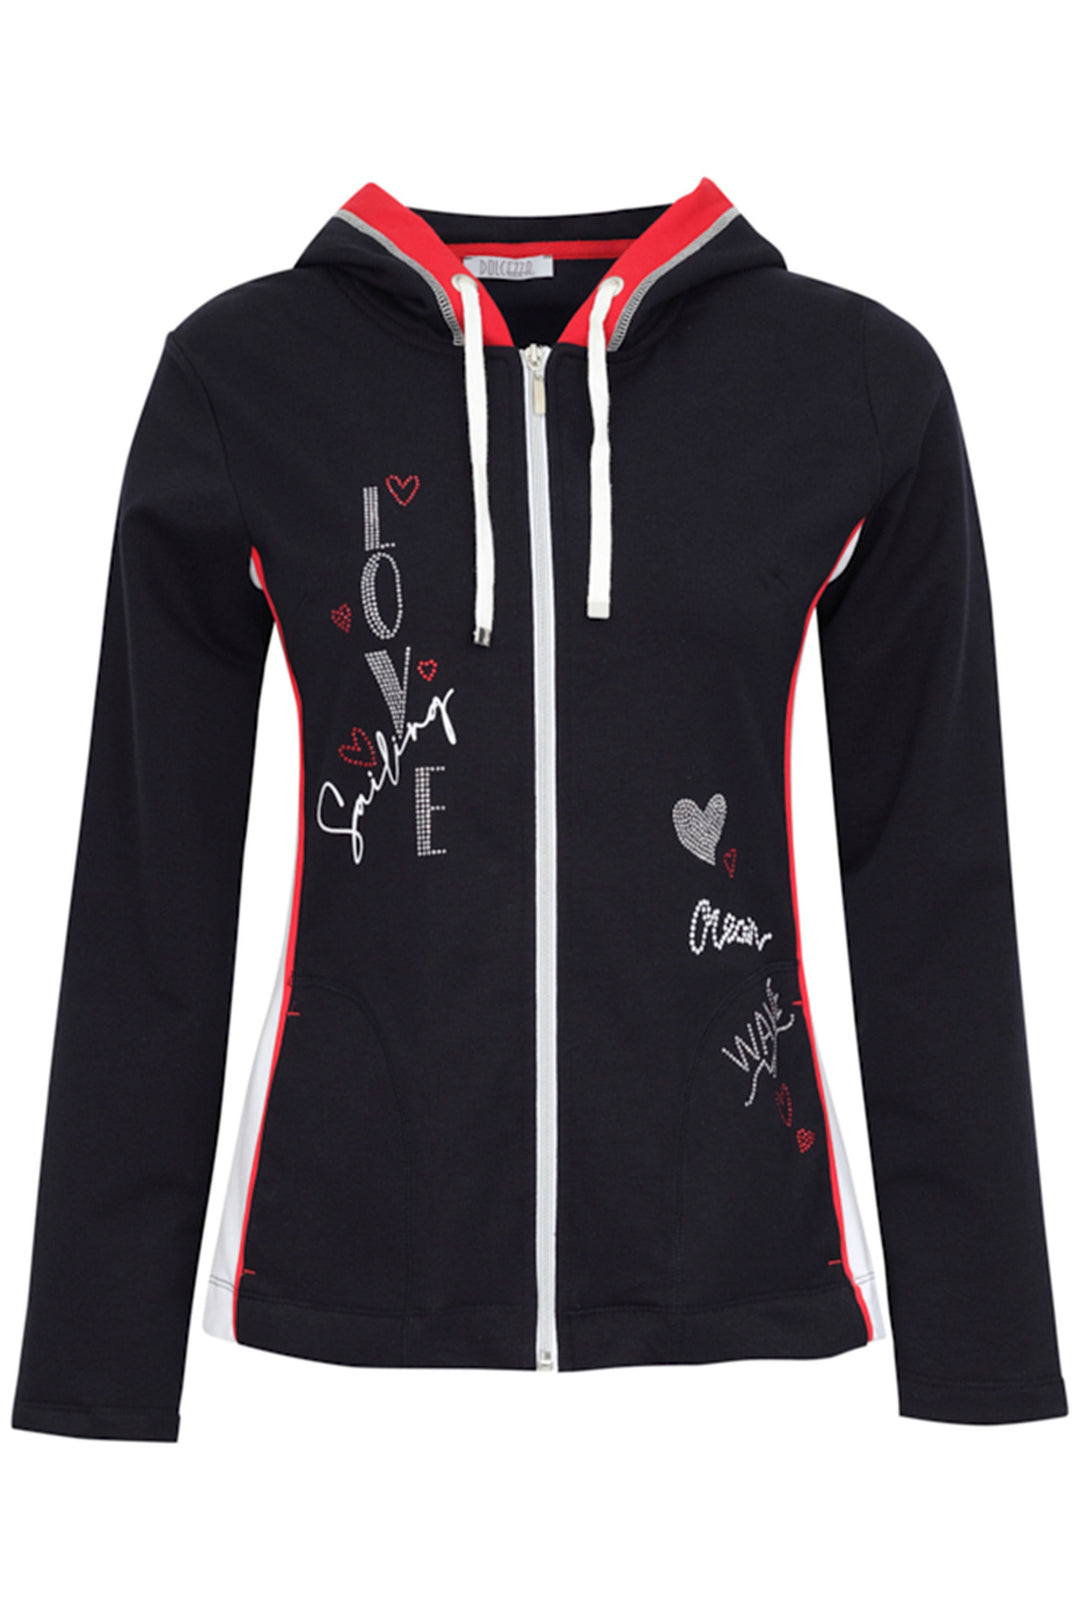 Dolcezza Spring 2024 This Love Sailing Hoodie Jacket blends style and function with its neat collar, contrasting side panels and drawstring hood. 